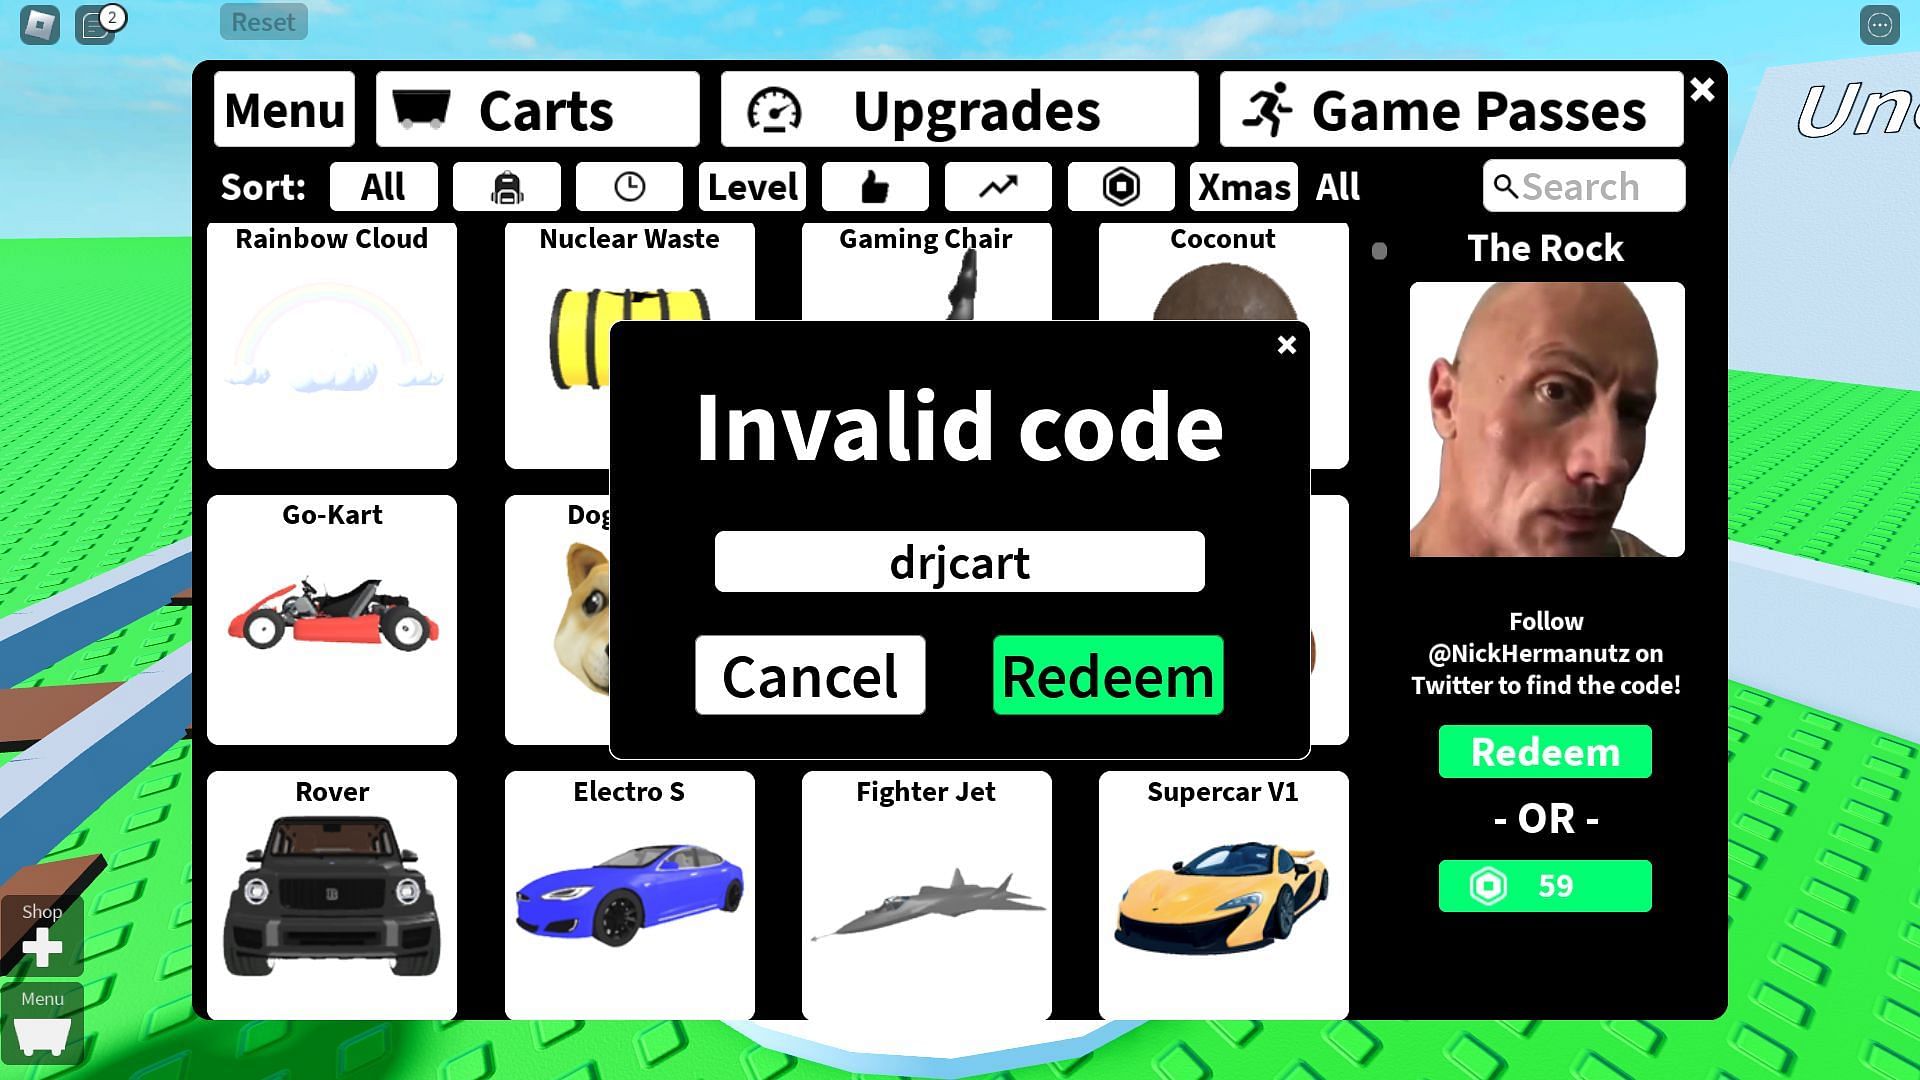 Troubleshooting codes for Create a Cart Ride (Image via Roblox)